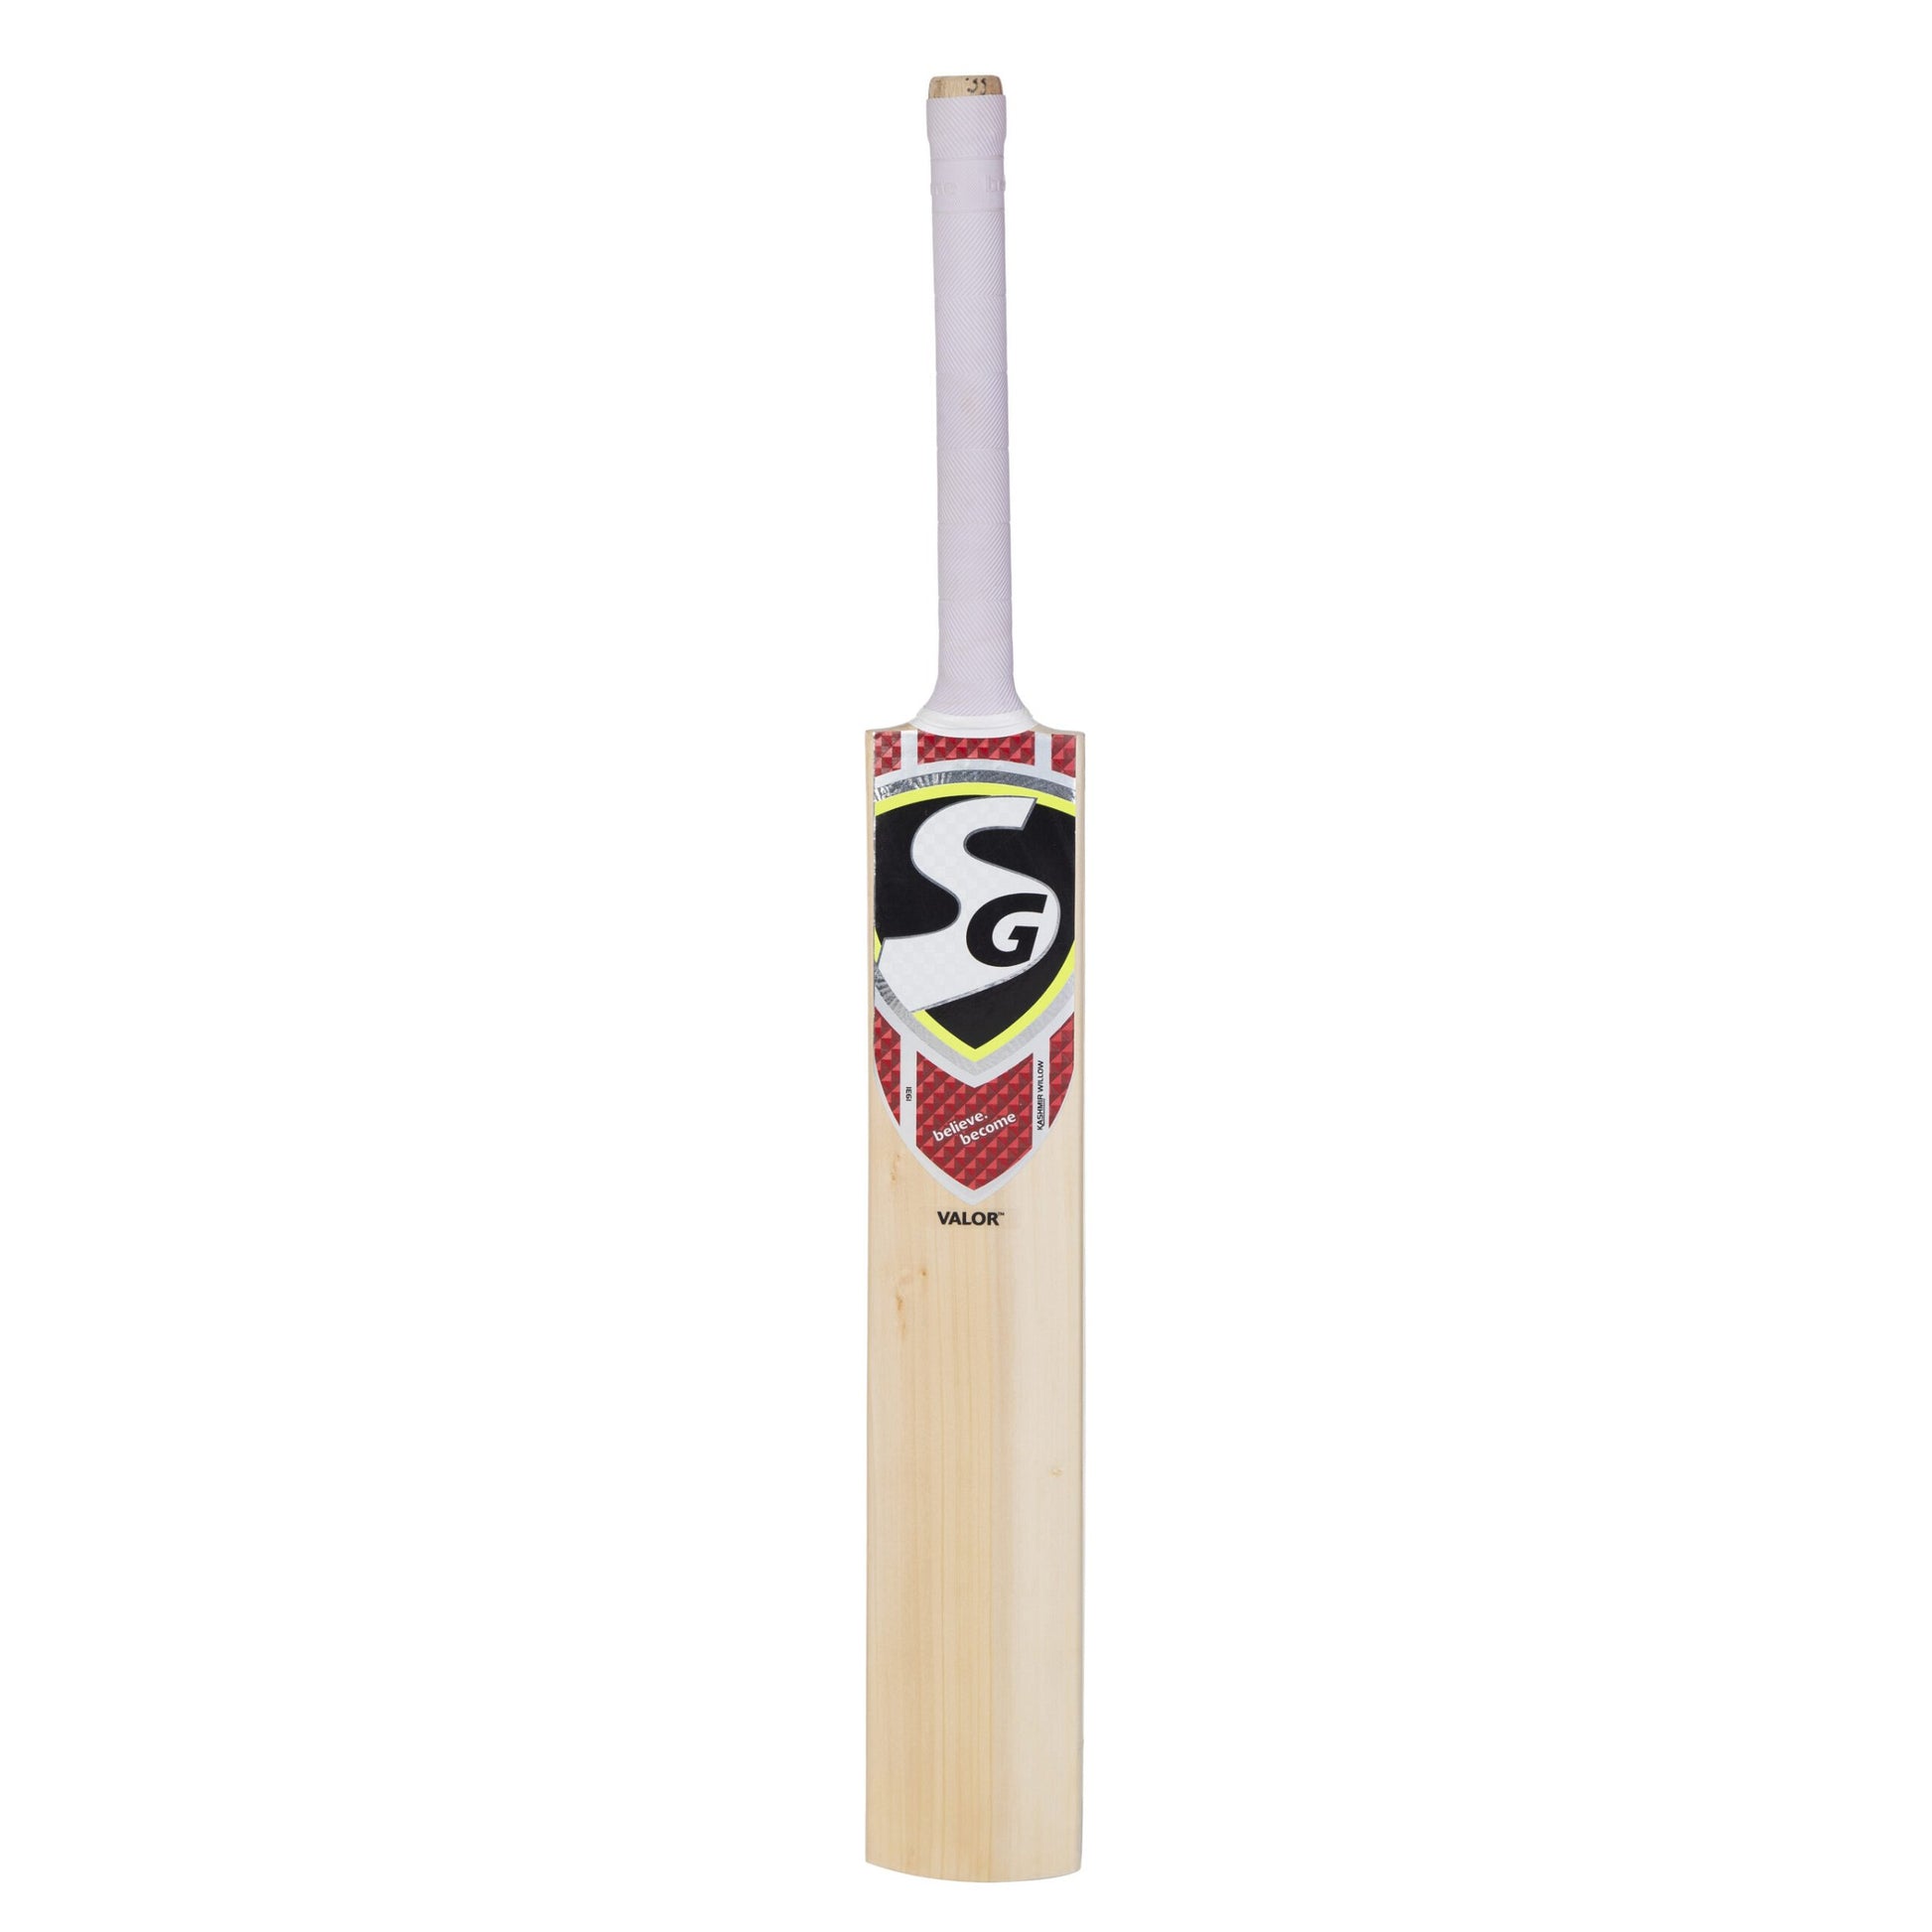 SG Valor Premium Kashmir Willow traditional shaped Cricket Bat (Leather Ball)